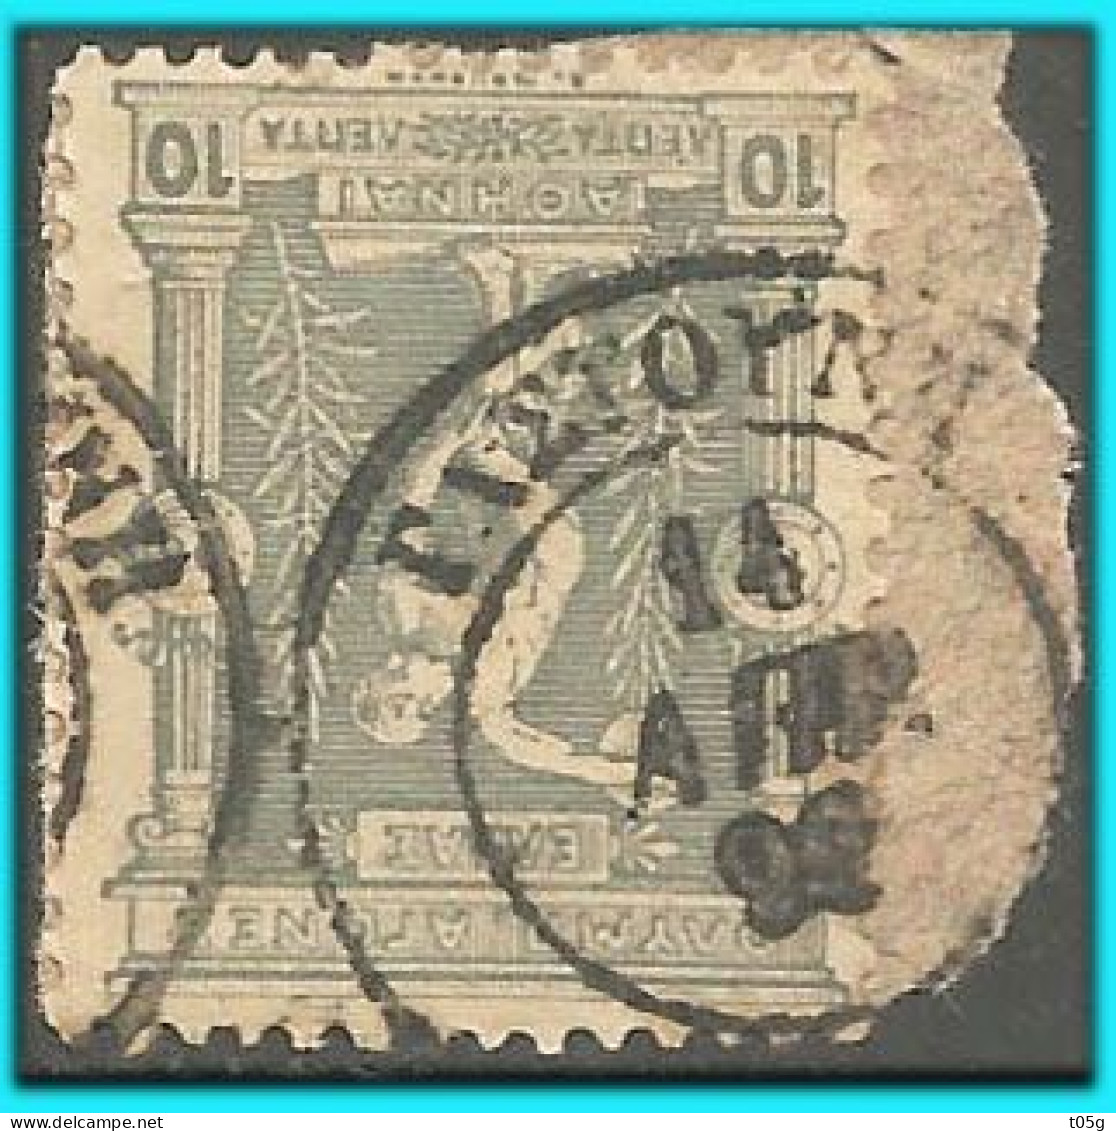 GREECE-GRECE- HELLAS:canc (ΓΑΣΤΟΥΝΗ 14 ΑΠΡ 96) On 10L Olympic Games 1896 Athens Used - Used Stamps